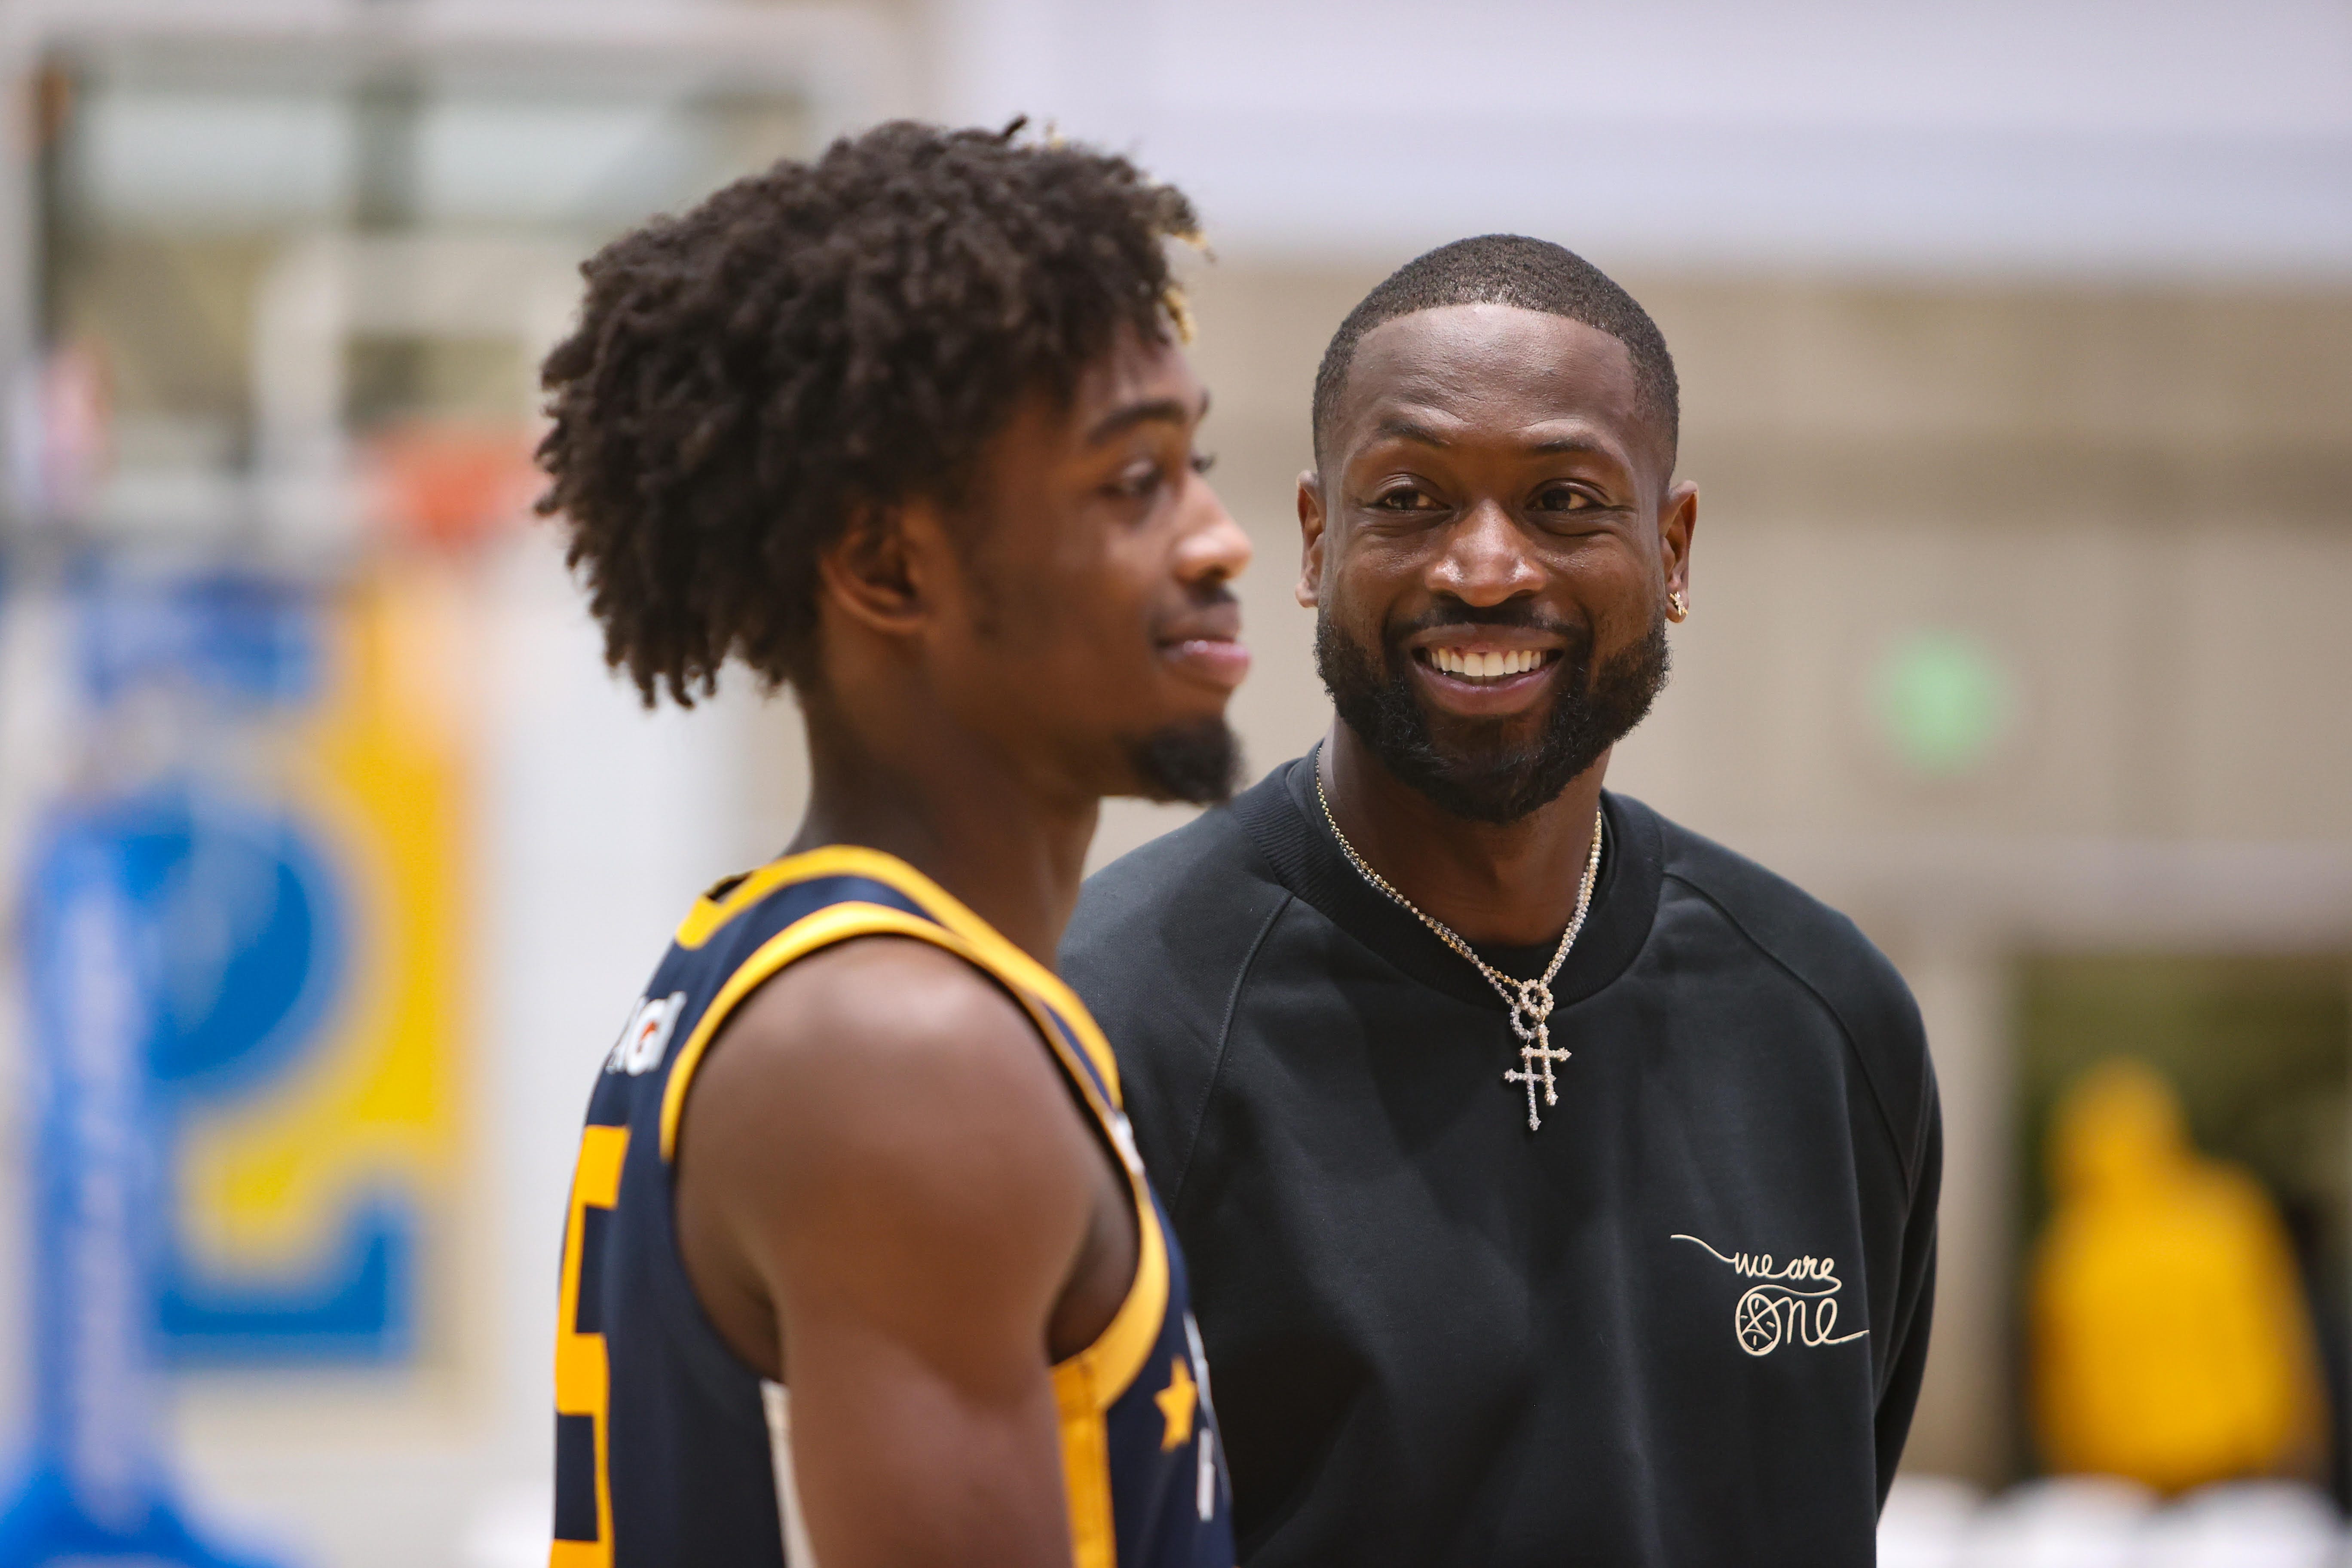 Zaire Wade, son of Dwyane Wade, is trying to make his own path to